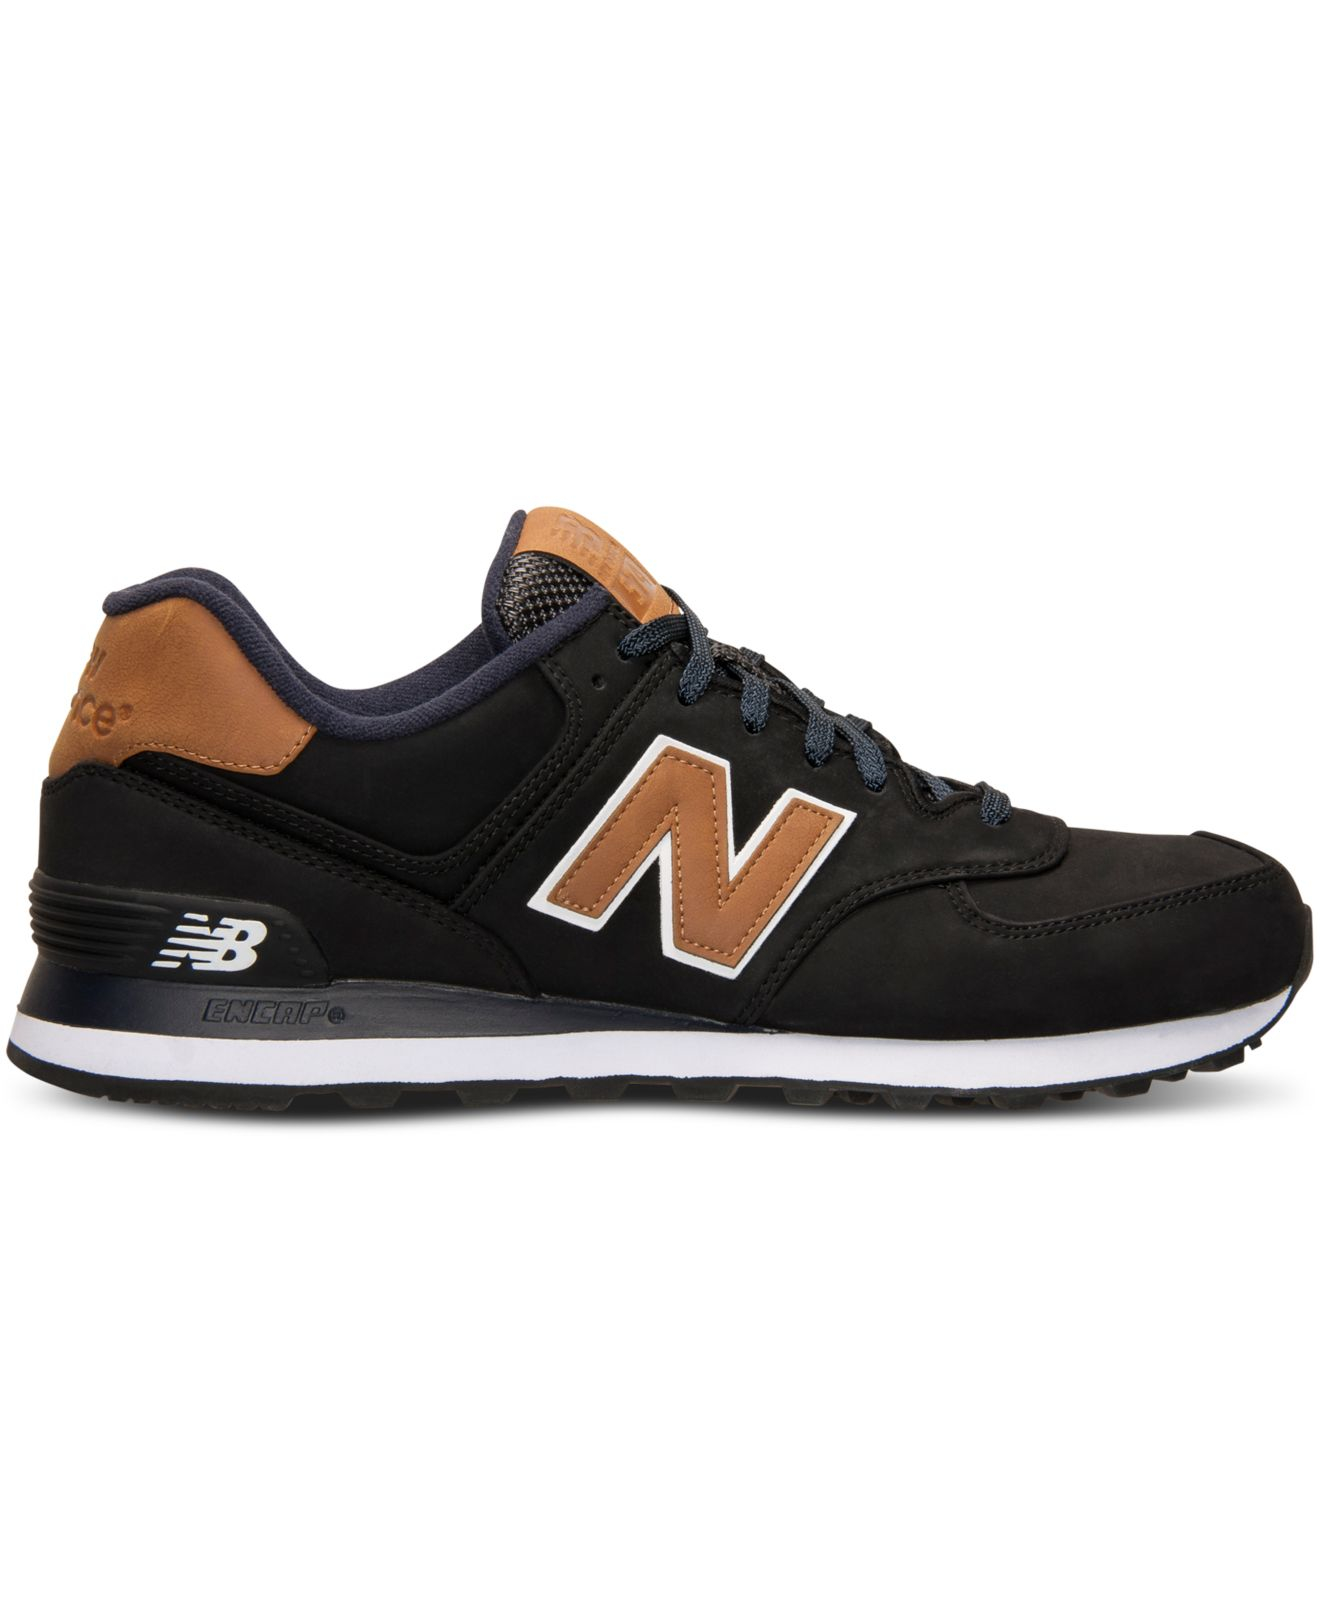 Lyst - New Balance Men's 574 Casual Sneakers From Finish Line in Black ...